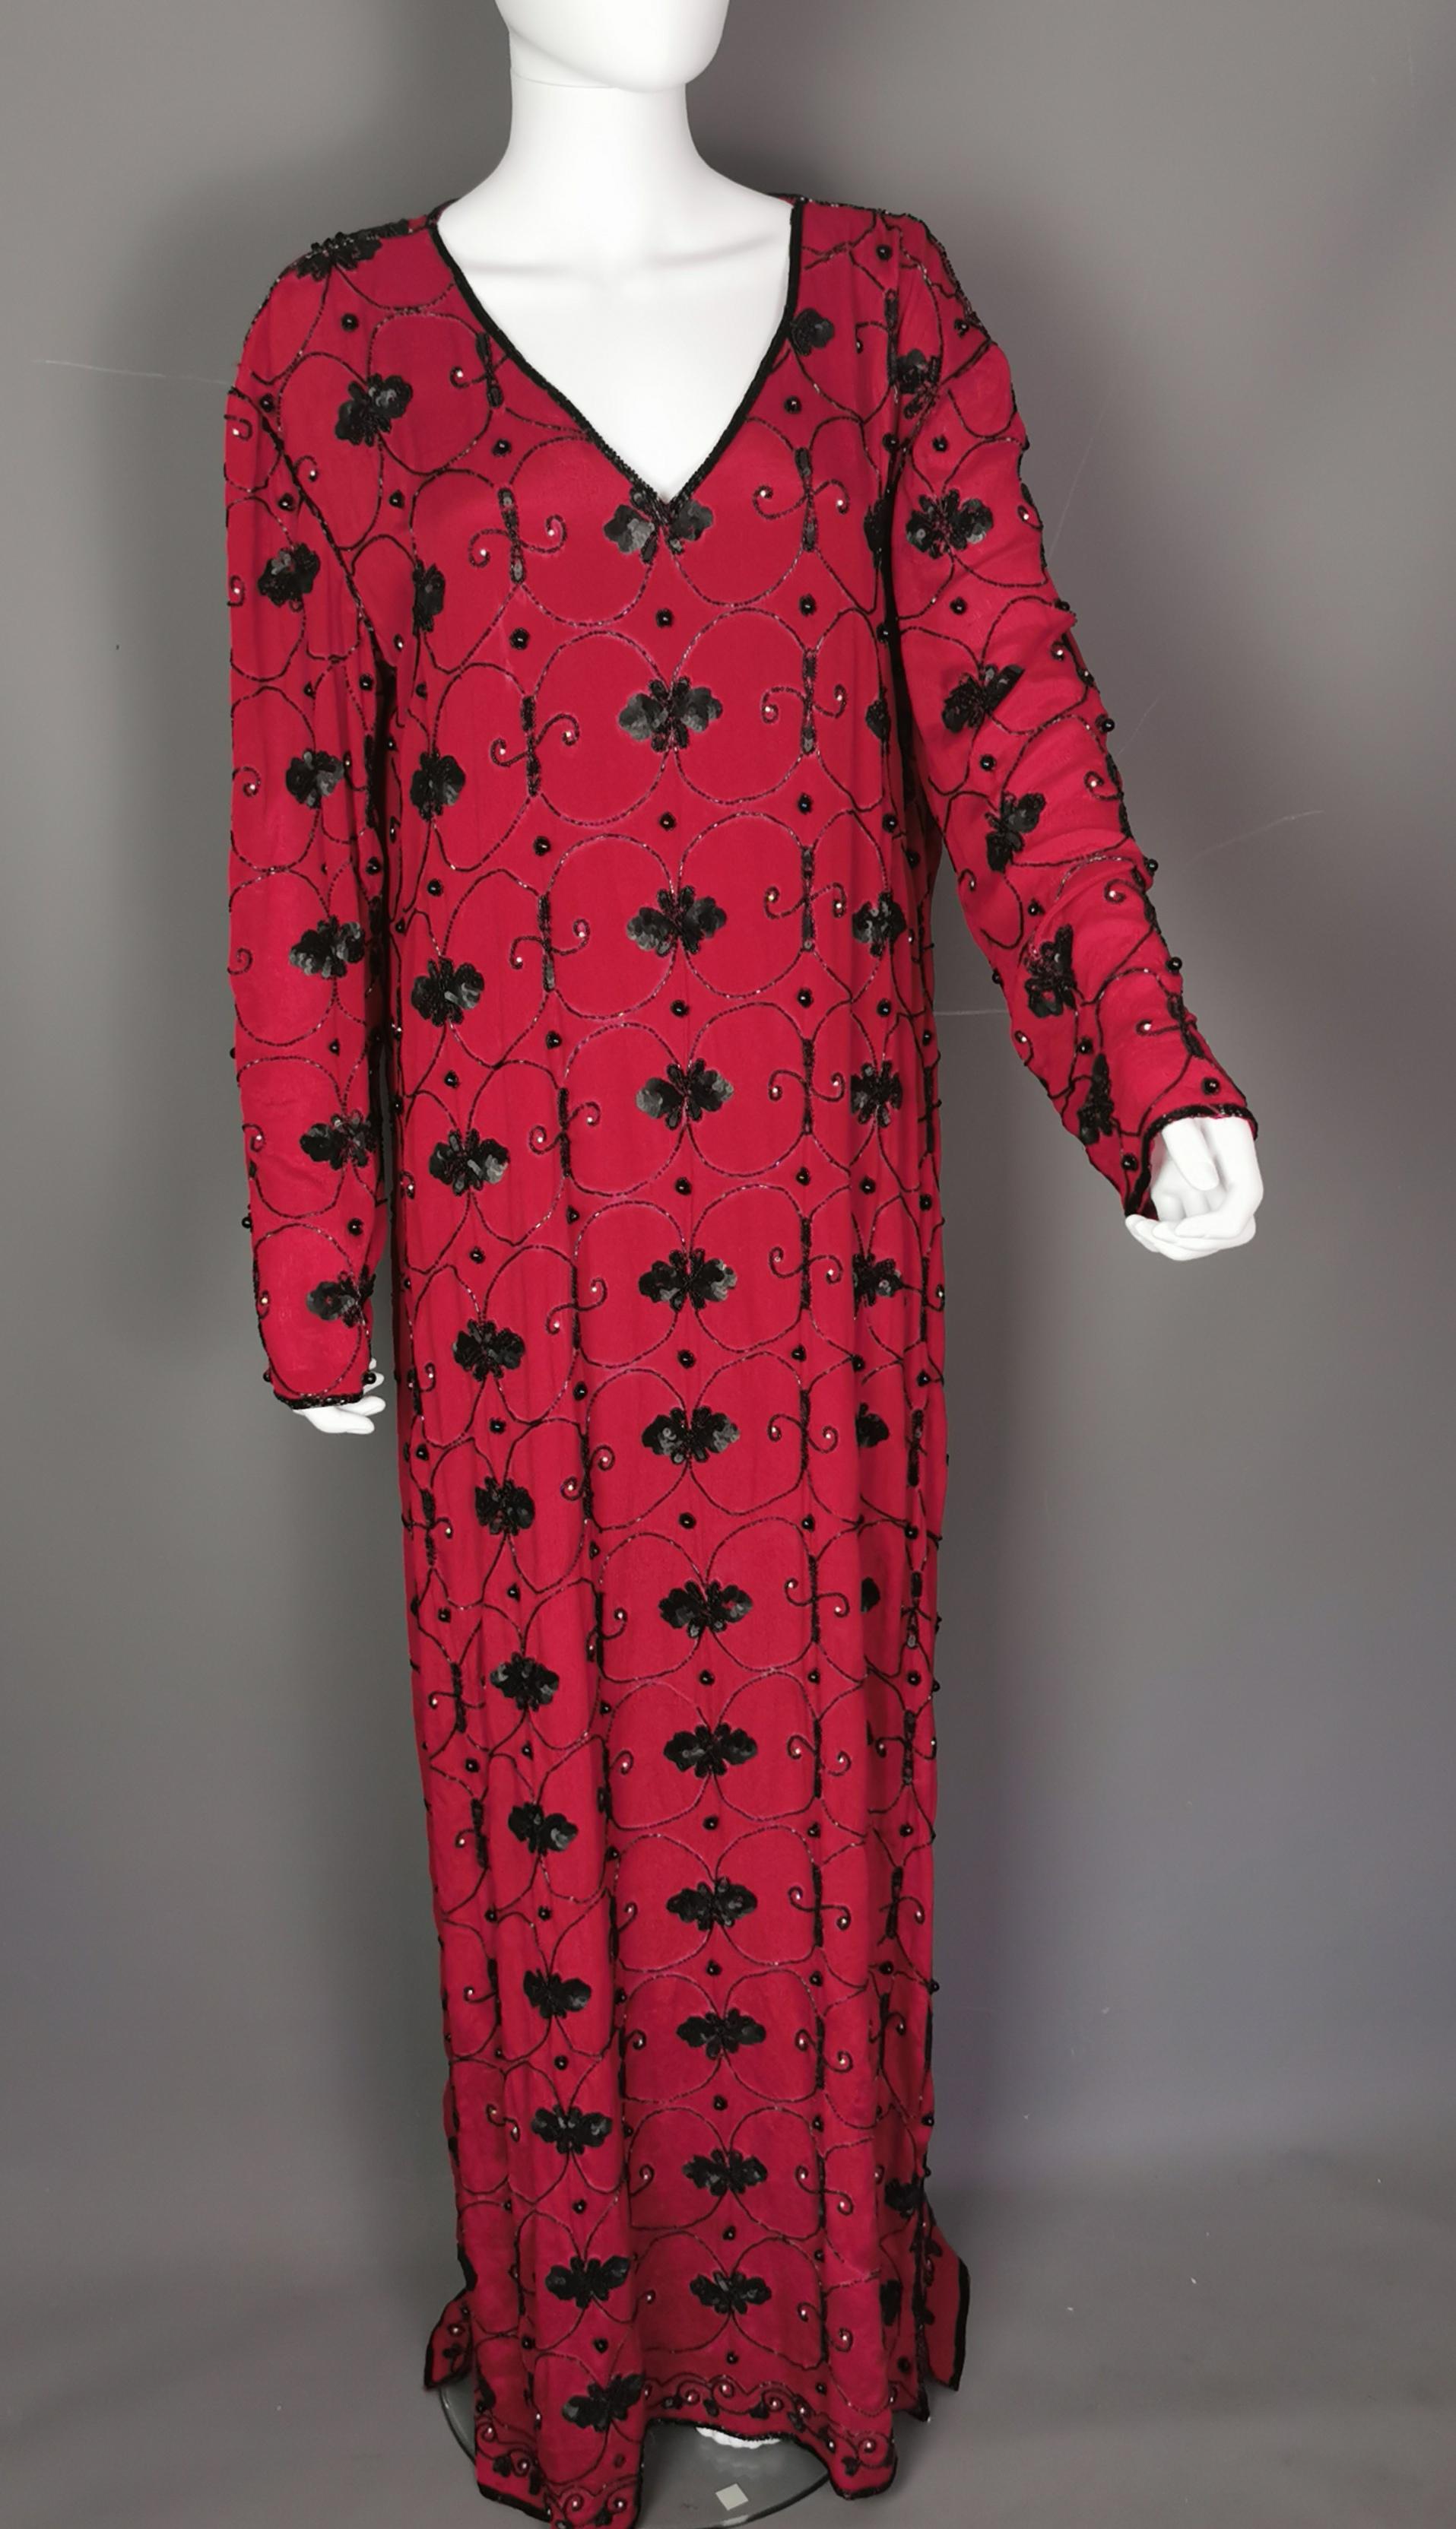 A truly magnificent vintage YSL Rive Gauche beaded sequin maxi dress.

A rare find, this dress has everything going and is YSL at its finest.

This is a long sleeved dress with a long flowing skirt, wider sleeves and a relaxed drapey silhouette,